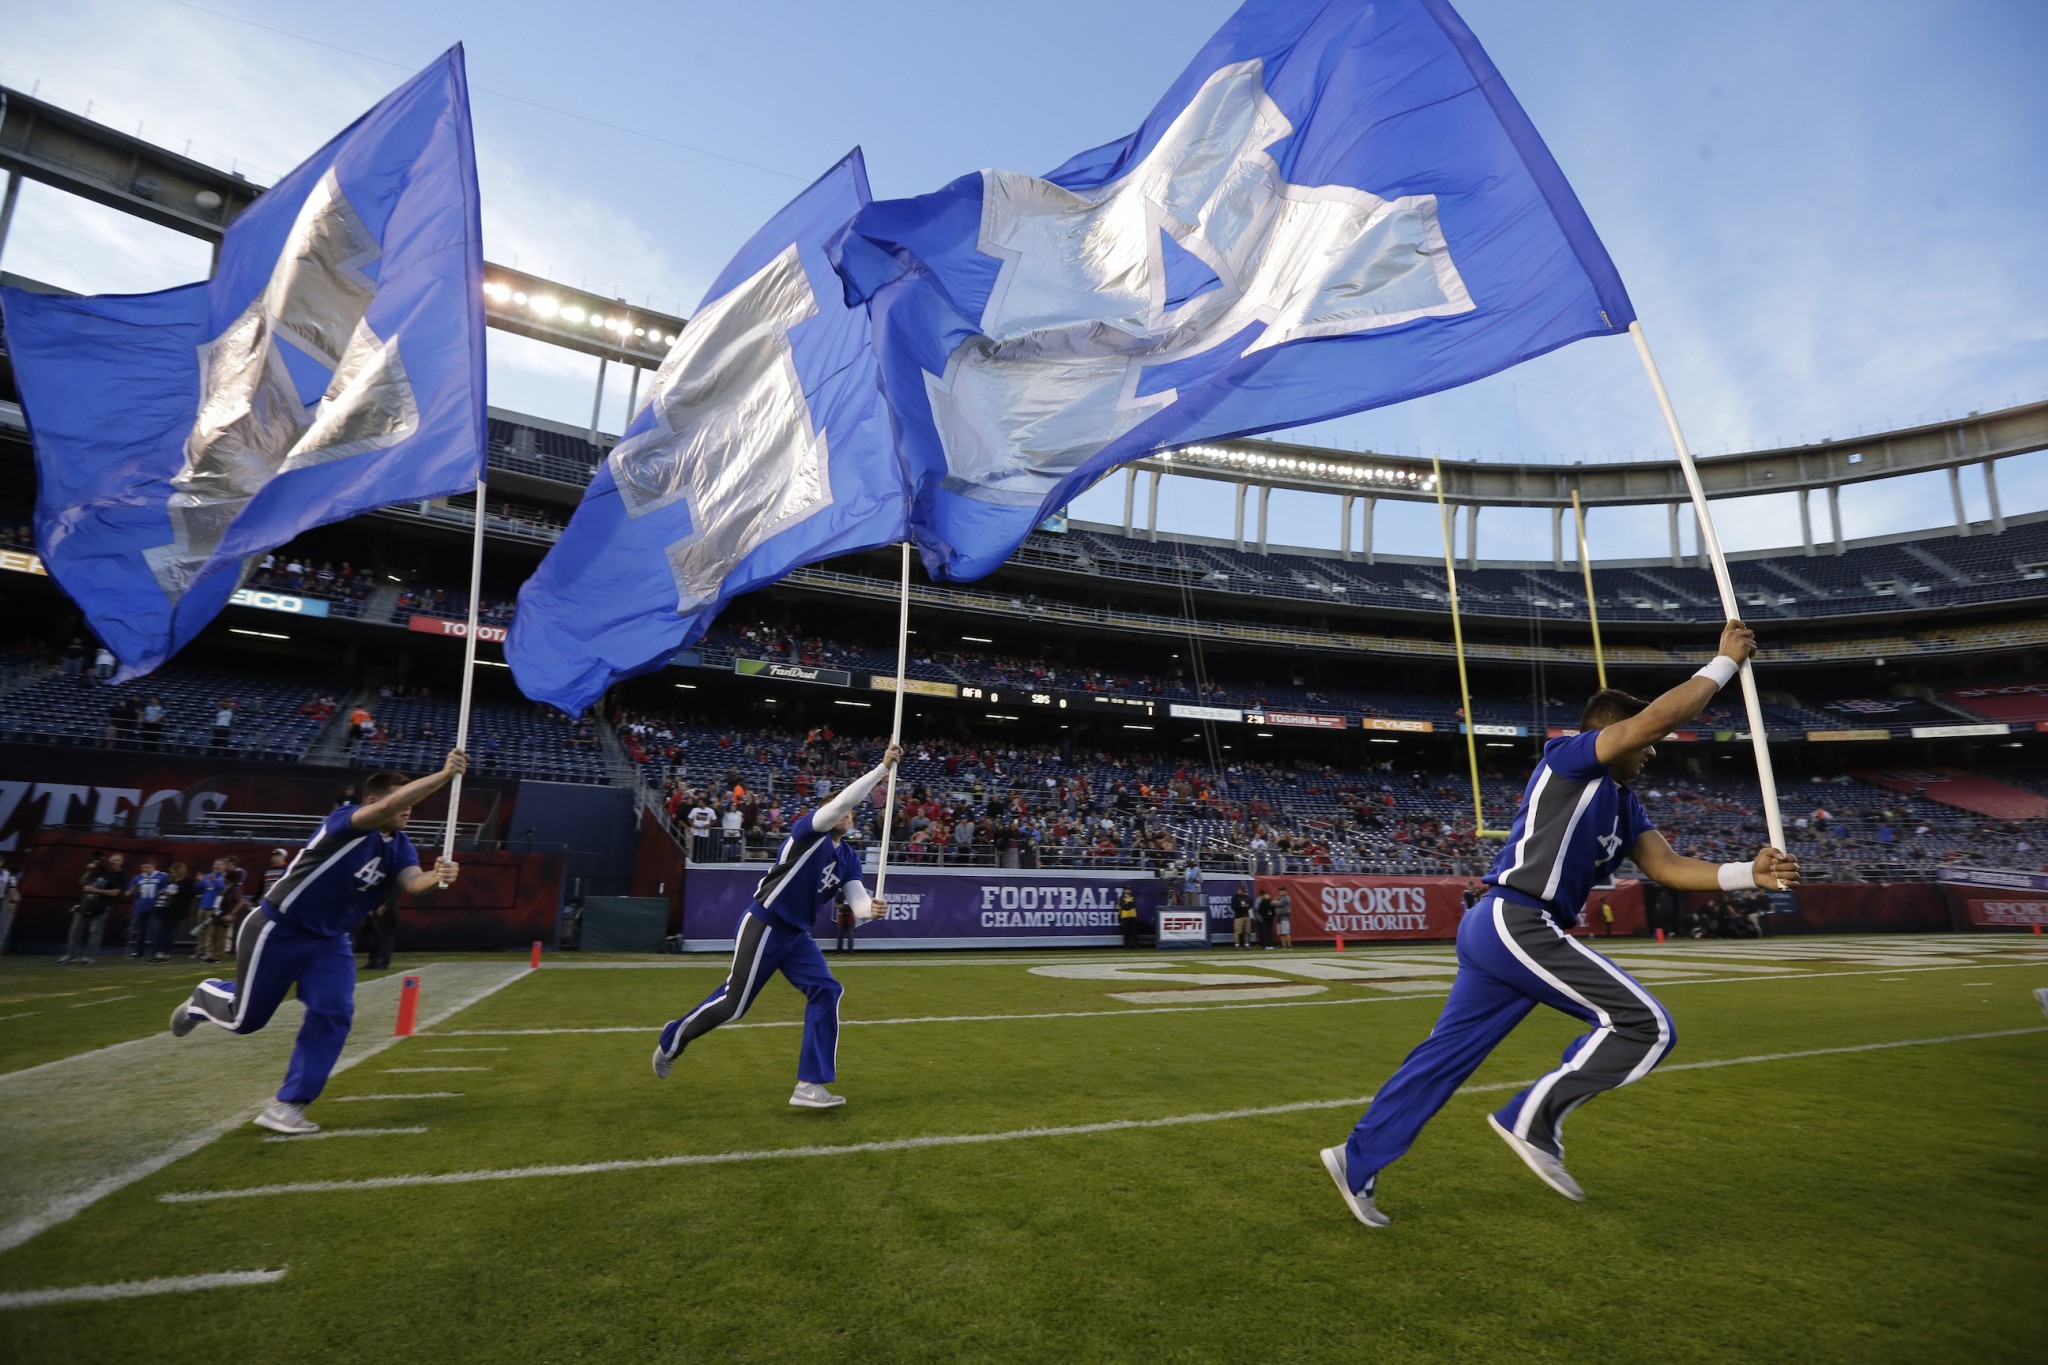 Air Force flag carriers run before the NCAA Mountain West Championship football game against San Diego State Saturday, Dec. 5, 2015, in San Diego. (AP Photo/Gregory Bull)